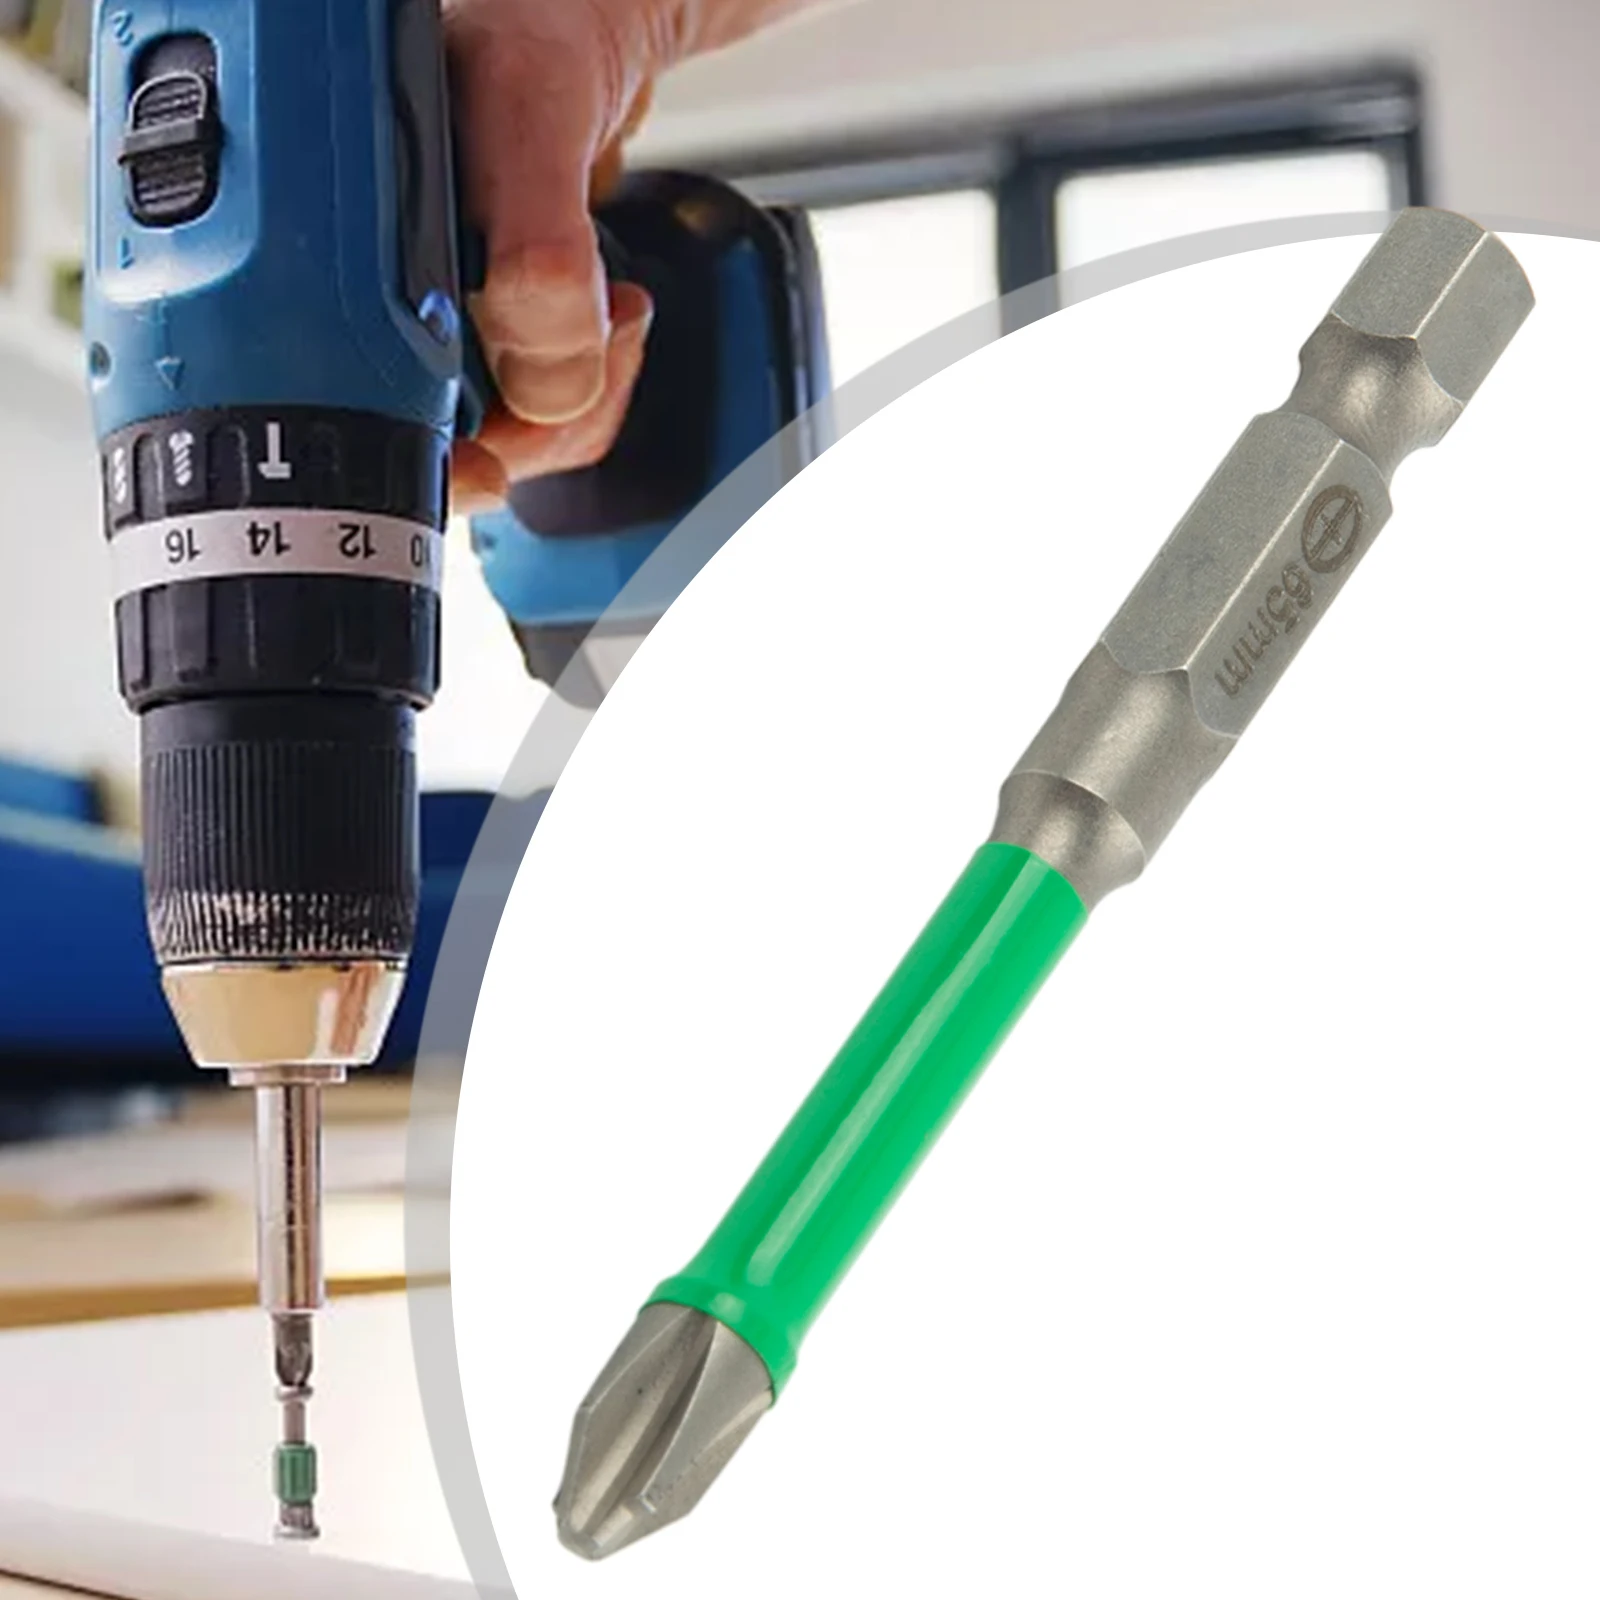 batch head screwdriver bit power tools screwdriver bit slotted special switch 110mm cross fph2 for socket green Fpz1 Fpz2 Fph2 Special Slotted Cross Screwdriver Bit Torque Electrical Tools For Electricians Socket Switch Circuit Breakers